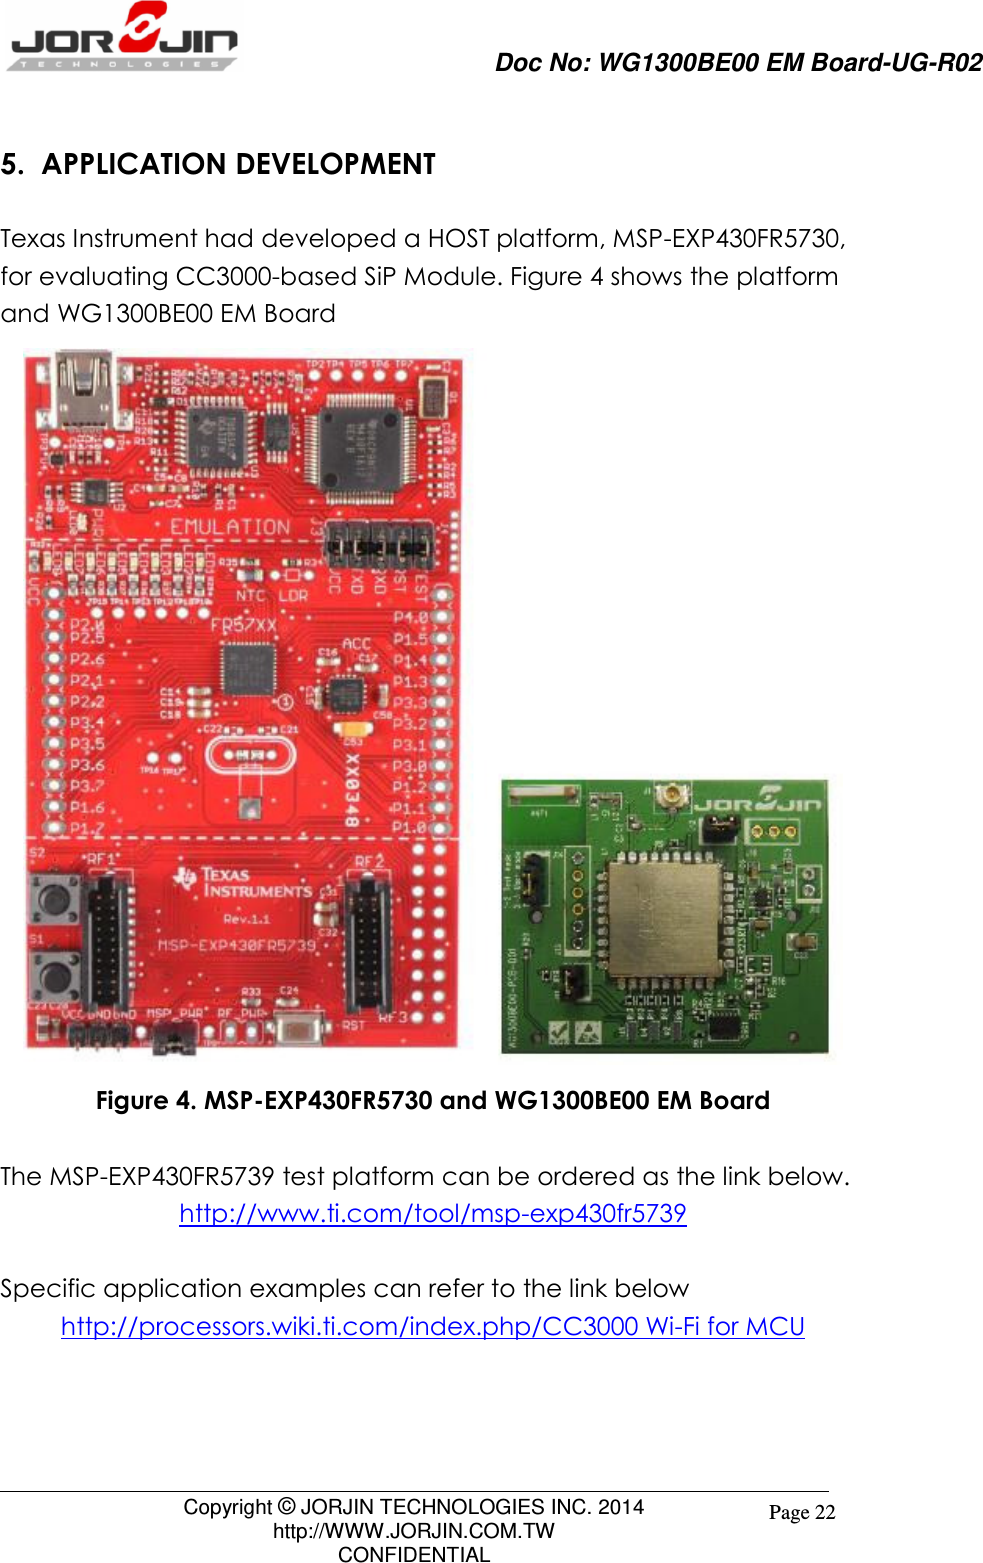                     Doc No: WG1300BE00 EM Board-UG-R02                                                                                        Copyright © JORJIN TECHNOLOGIES INC. 2014 http://WWW.JORJIN.COM.TW CONFIDENTIAL Page 22 5.  APPLICATION DEVELOPMENT Texas Instrument had developed a HOST platform, MSP-EXP430FR5730, for evaluating CC3000-based SiP Module. Figure 4 shows the platform and WG1300BE00 EM Board  Figure 4. MSP-EXP430FR5730 and WG1300BE00 EM Board  The MSP-EXP430FR5739 test platform can be ordered as the link below. http://www.ti.com/tool/msp-exp430fr5739  Specific application examples can refer to the link below http://processors.wiki.ti.com/index.php/CC3000 Wi-Fi for MCU    